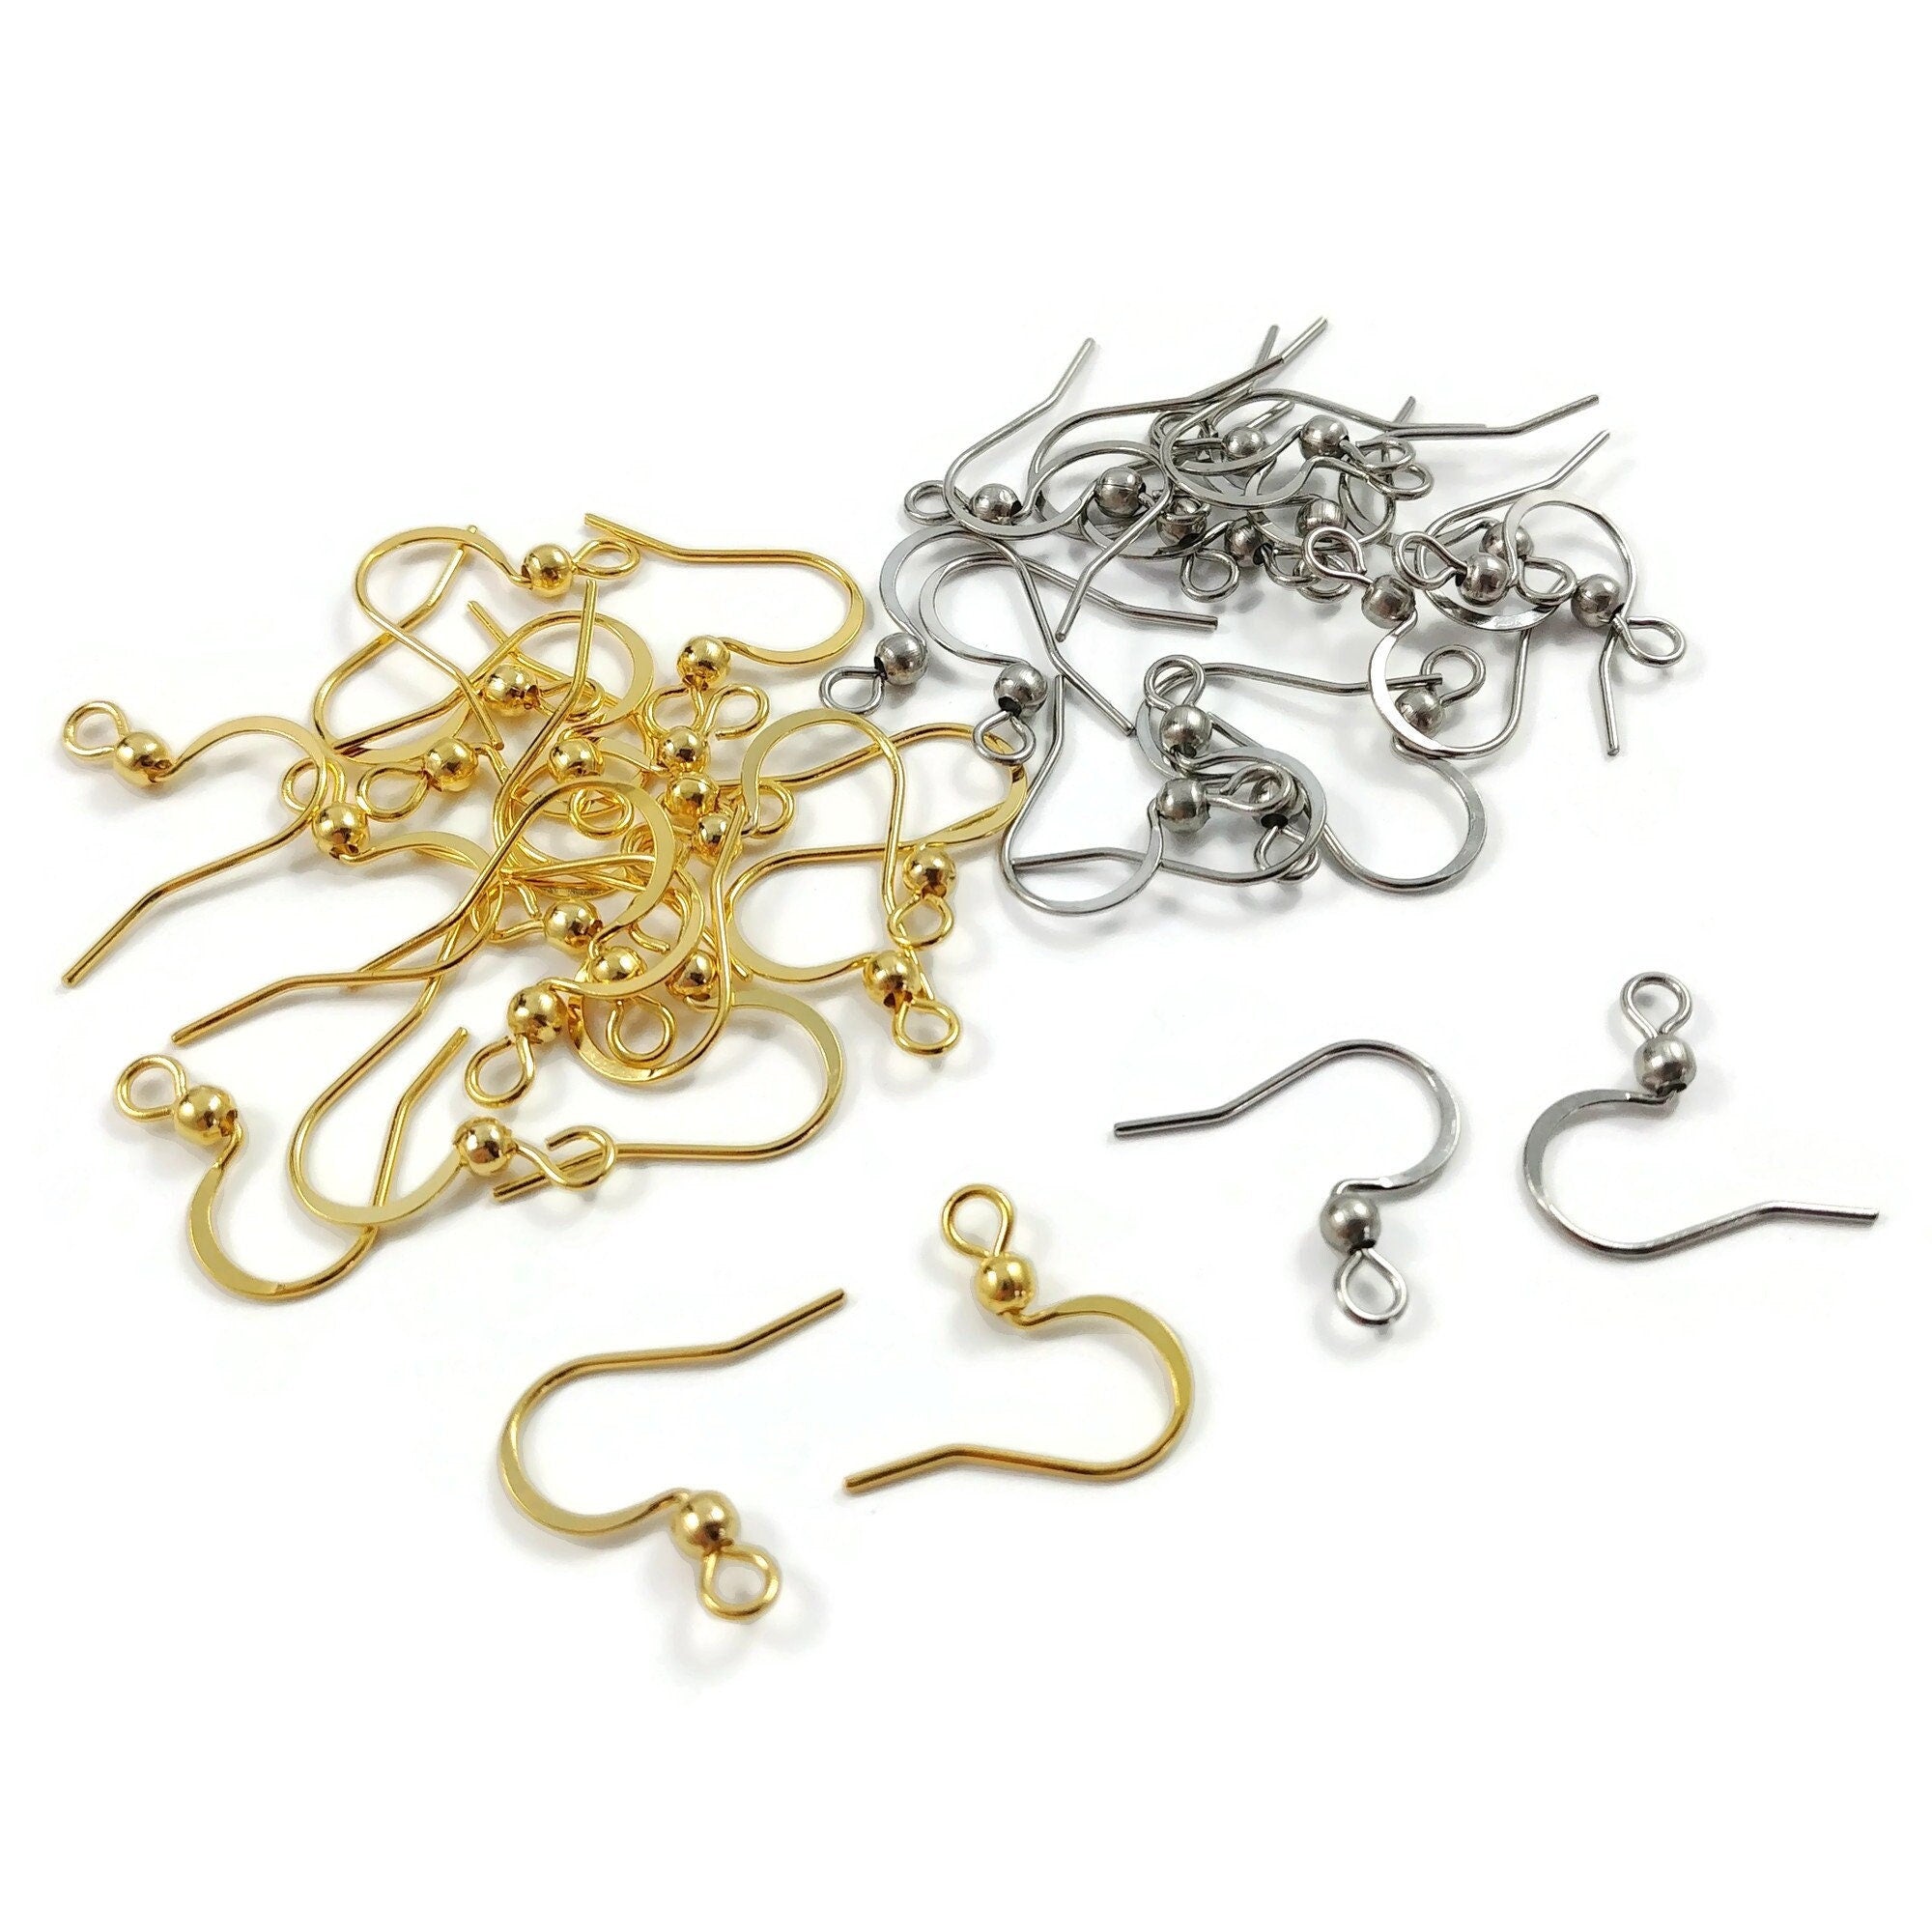 Clip-on Earring Findings, 20pcs (10 Pairs) Round Flat Tray Earring